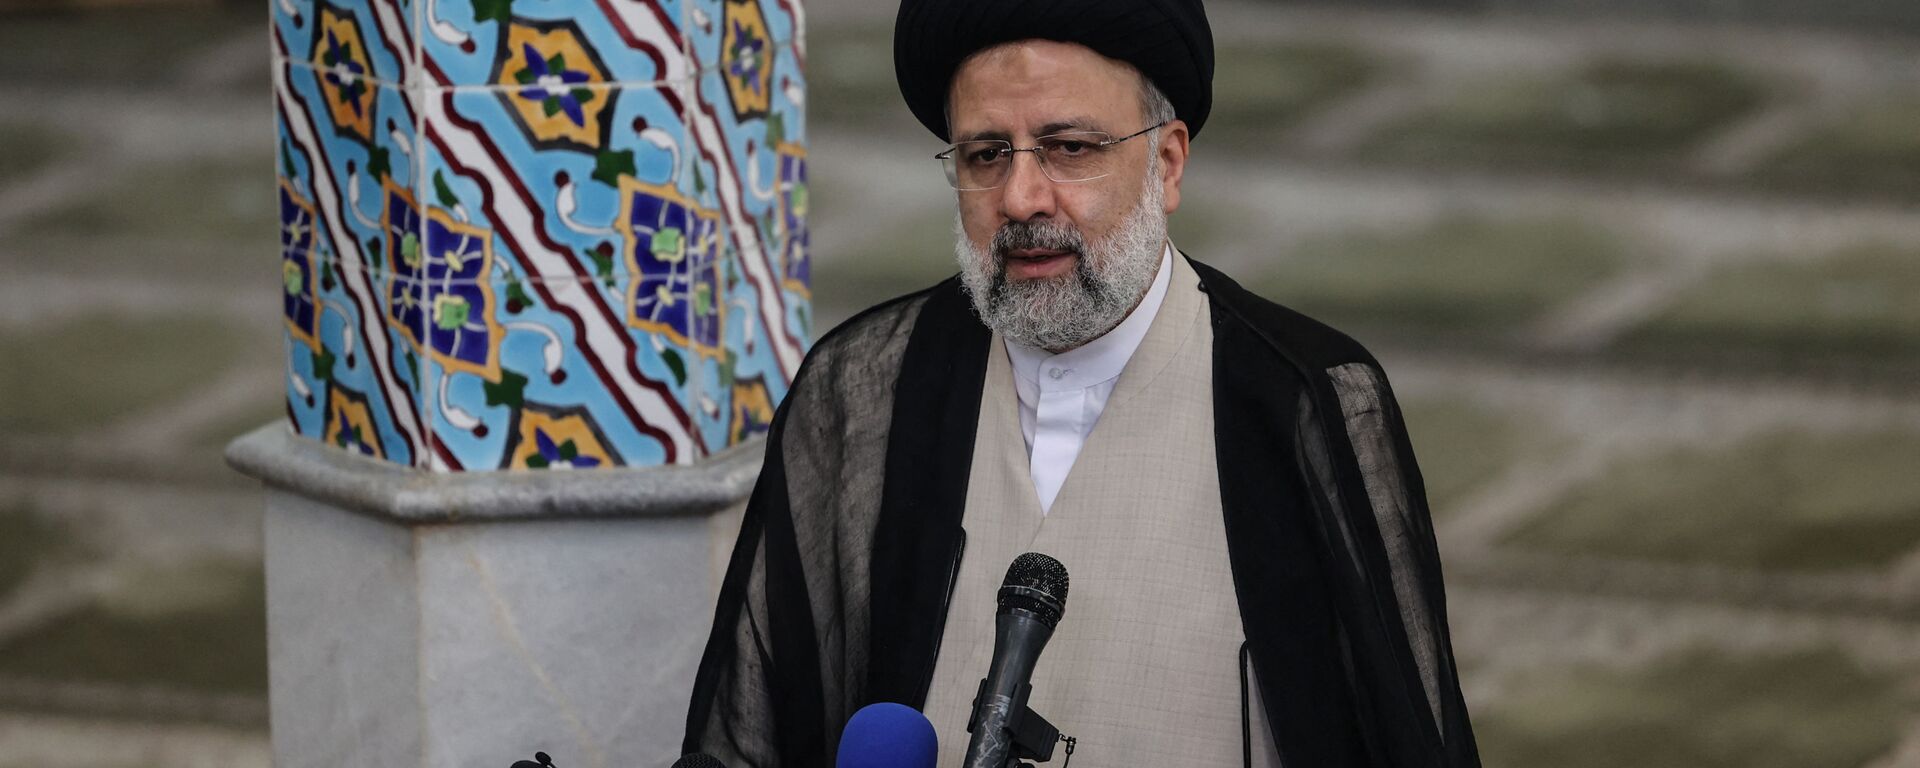 Ebrahim Raisi gives a news conference after voting in the presidential election, at a polling station in the capital Tehran, on June 18, 2021. - Raisi on June 19 declared the winner of a presidential election, a widely anticipated result after many political heavyweights were barred from running. - Sputnik India, 1920, 18.05.2023